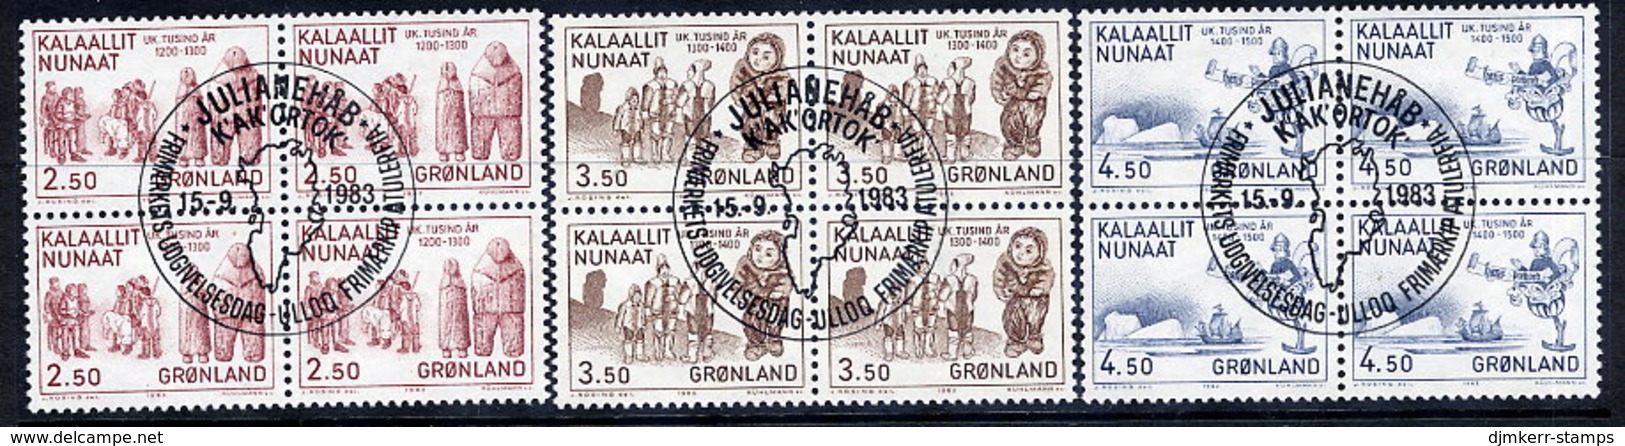 GREENLAND 1983 Millenary Of Settlement In Used  Blocks Of 4.  Michel 143-45 - Used Stamps